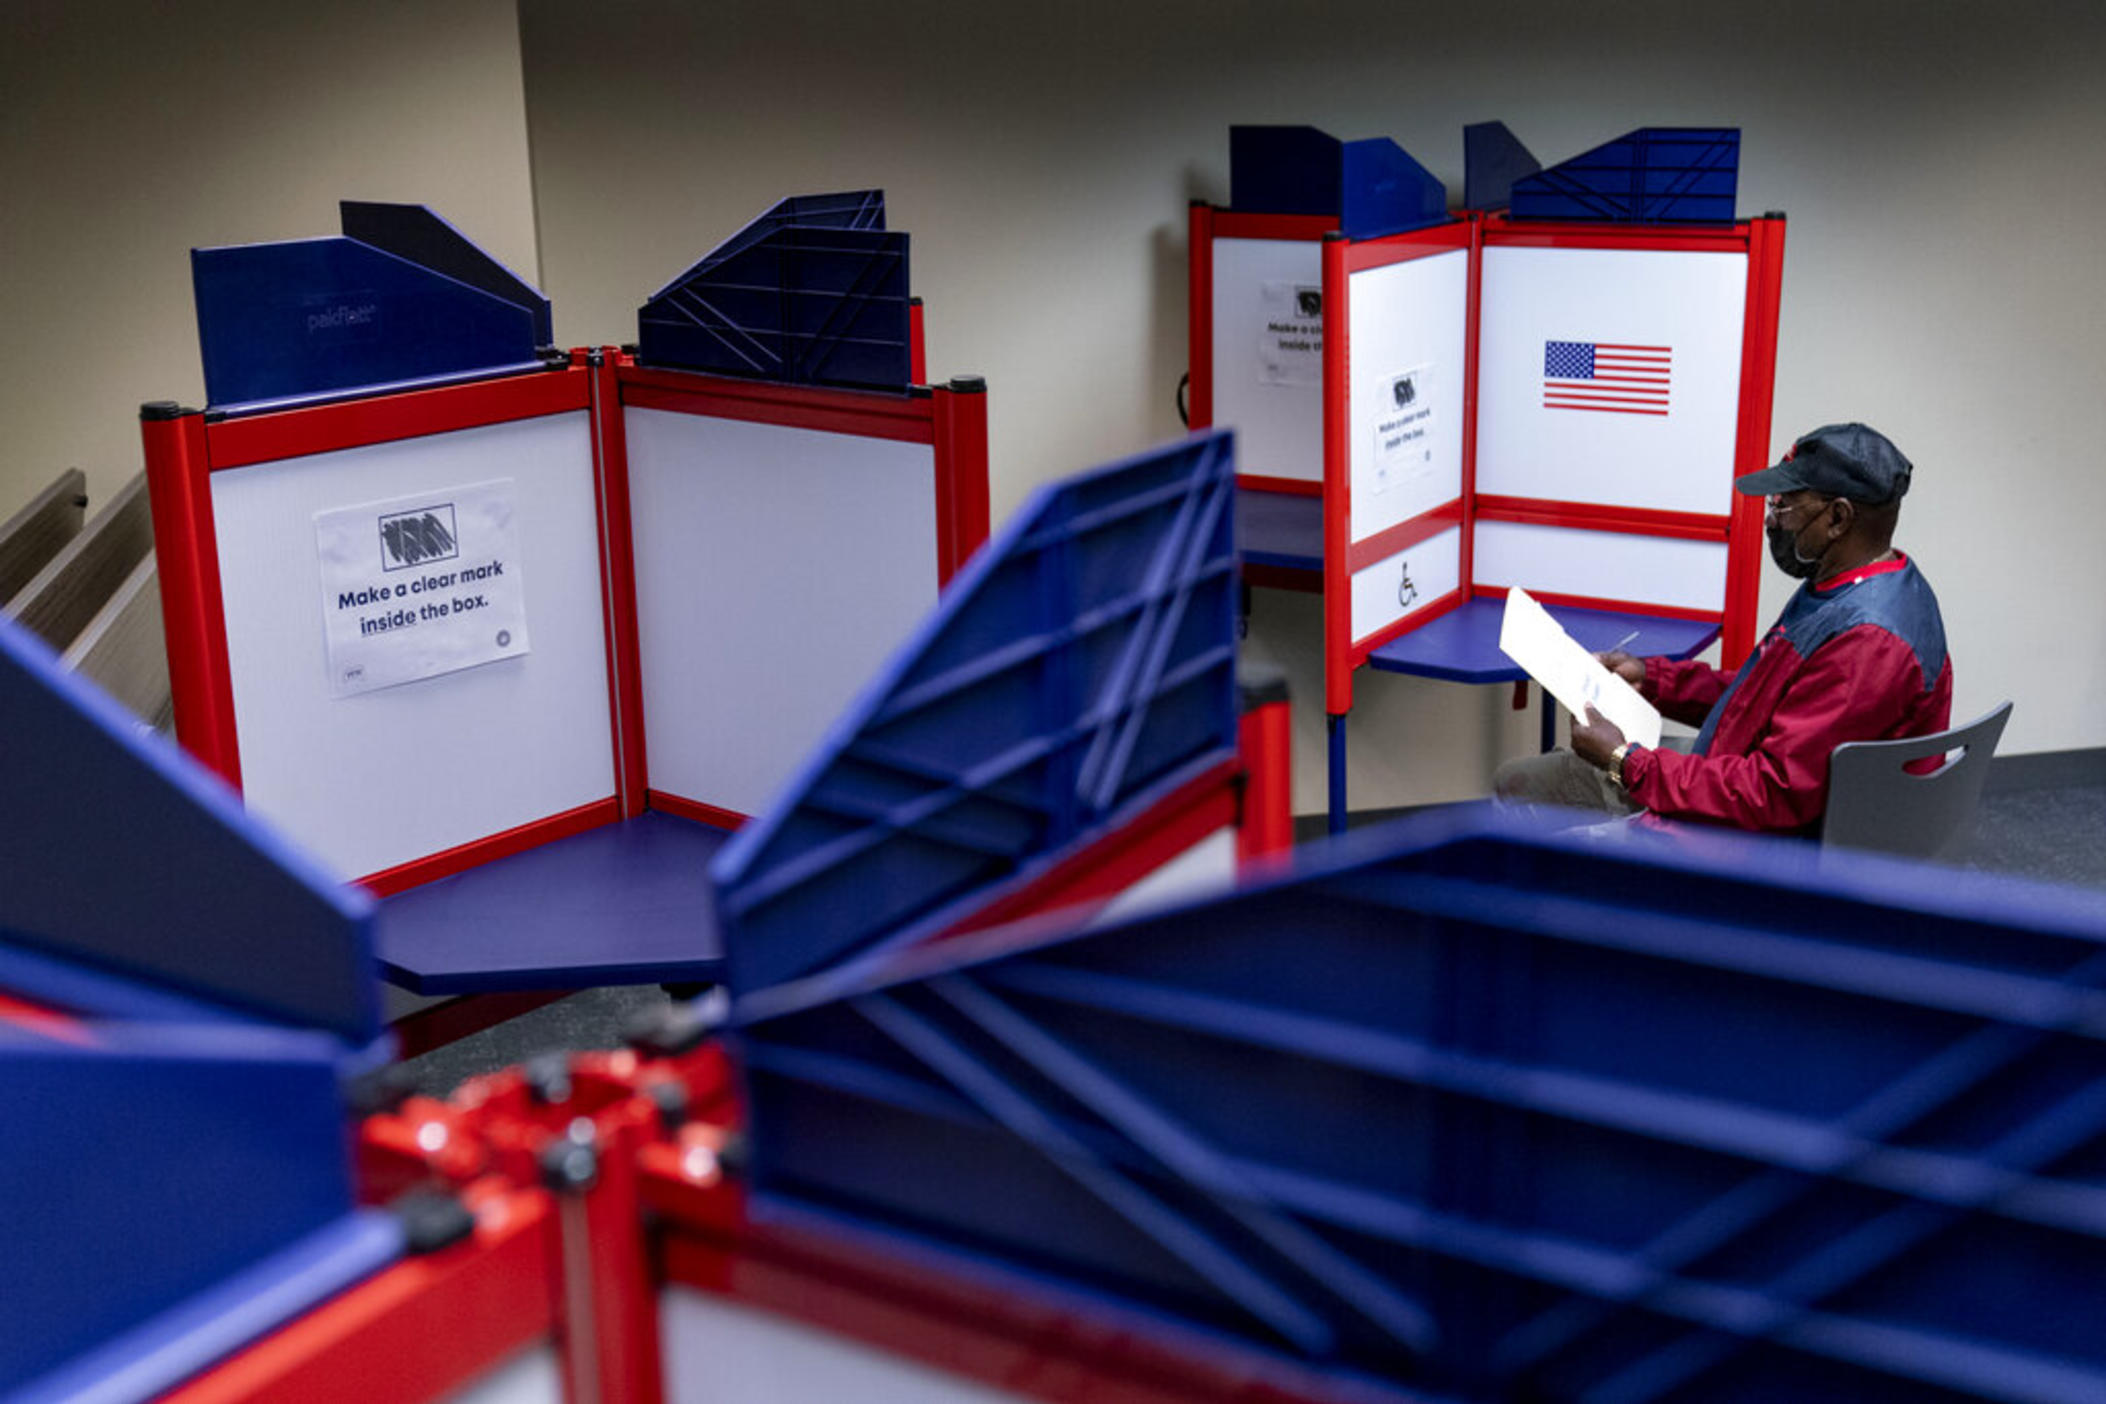 Cornelius Whiting fills out his ballot at an early voting location in Alexandria, Va., on Sept. 26, 2022. Republican activists who believe the 2020 election was stolen from former President Donald Trump have crafted a plan that, in their telling, will thwart cheating in this year’s midterm elections. 